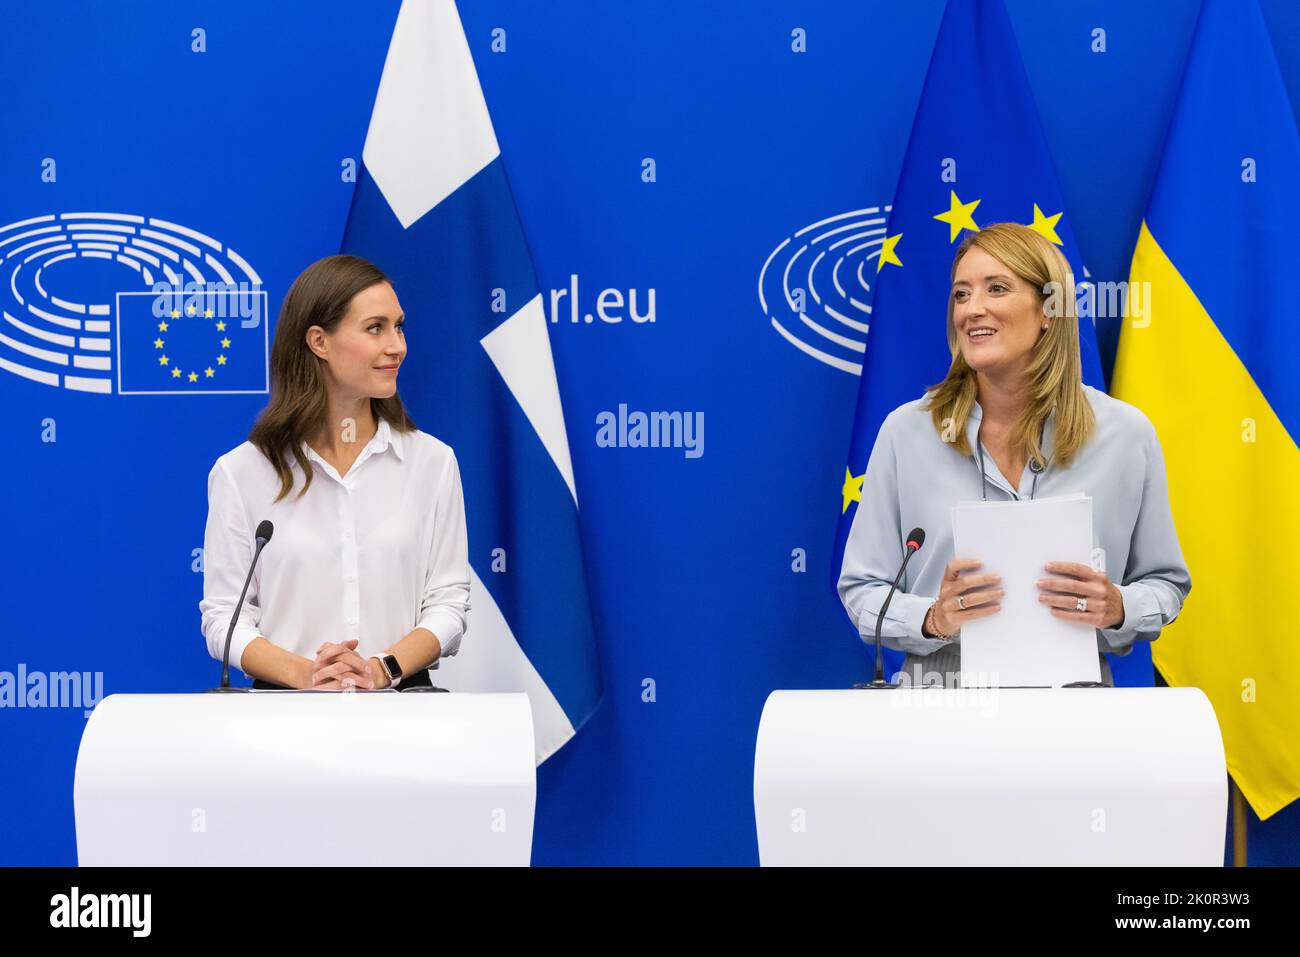 13 September 2022, France, Straßburg: Sanna Marin (SDP, l), Prime Minister of Finland, stands next to Roberta Metsola (Partit Nazzjonalista, r), President of the European Parliament, in the European Parliament building and listens to her. MEPs are discussing uniform rules for minimum wages in the EU on Tuesday. In addition, several votes, for example on the protection of forests in third countries, are on the agenda. Photo: Philipp von Ditfurth/dpa Stock Photo